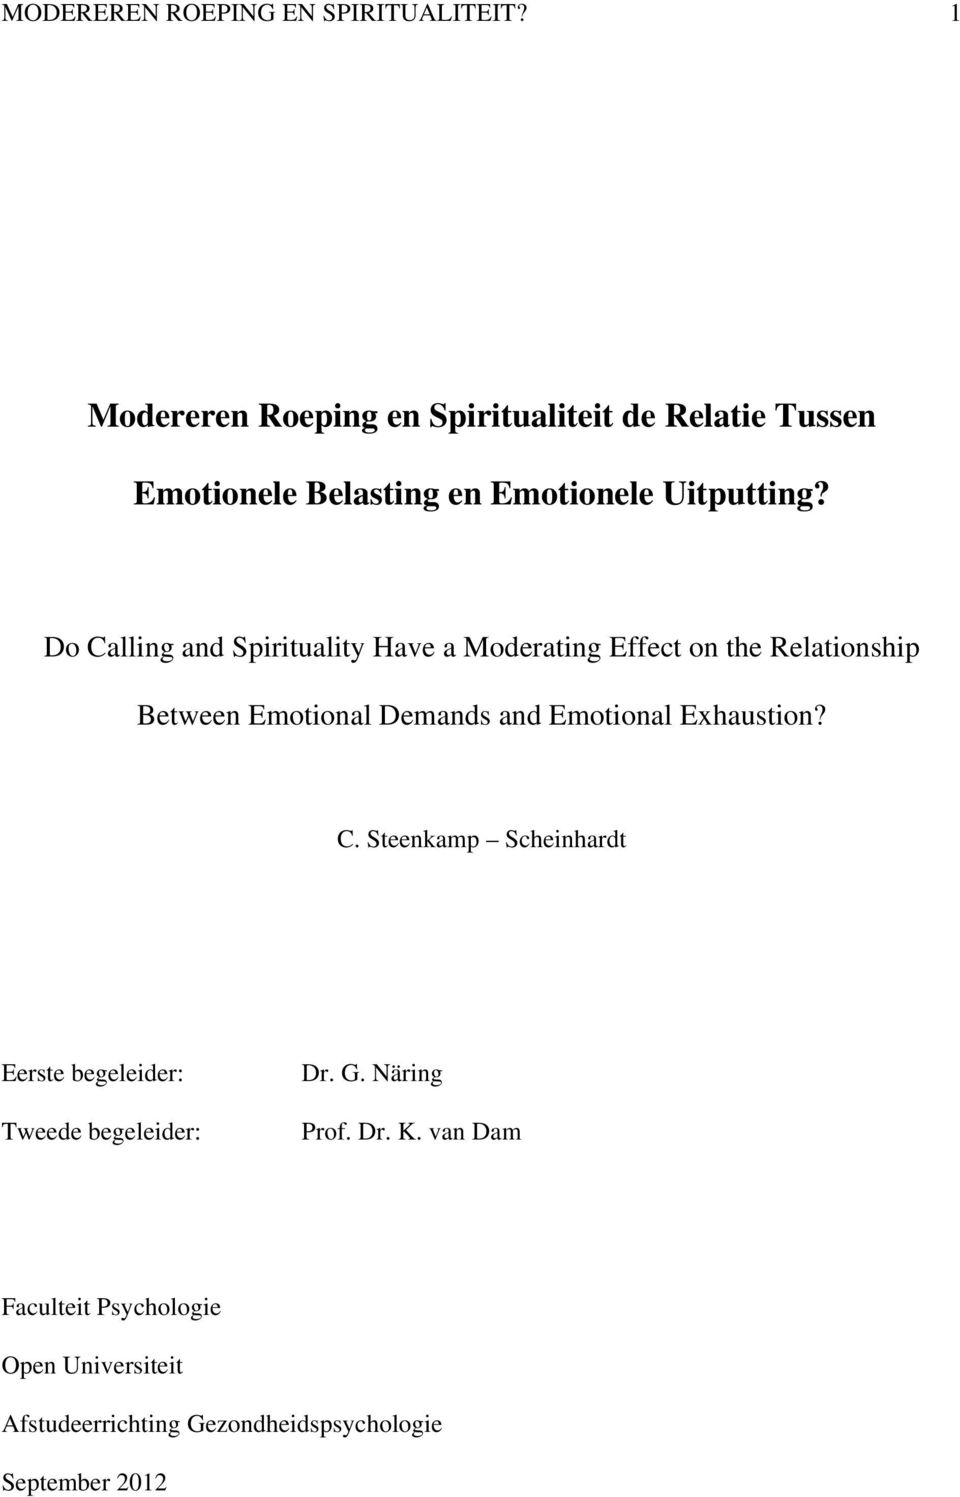 Do Calling and Spirituality Have a Moderating Effect on the Relationship Between Emotional Demands and Emotional